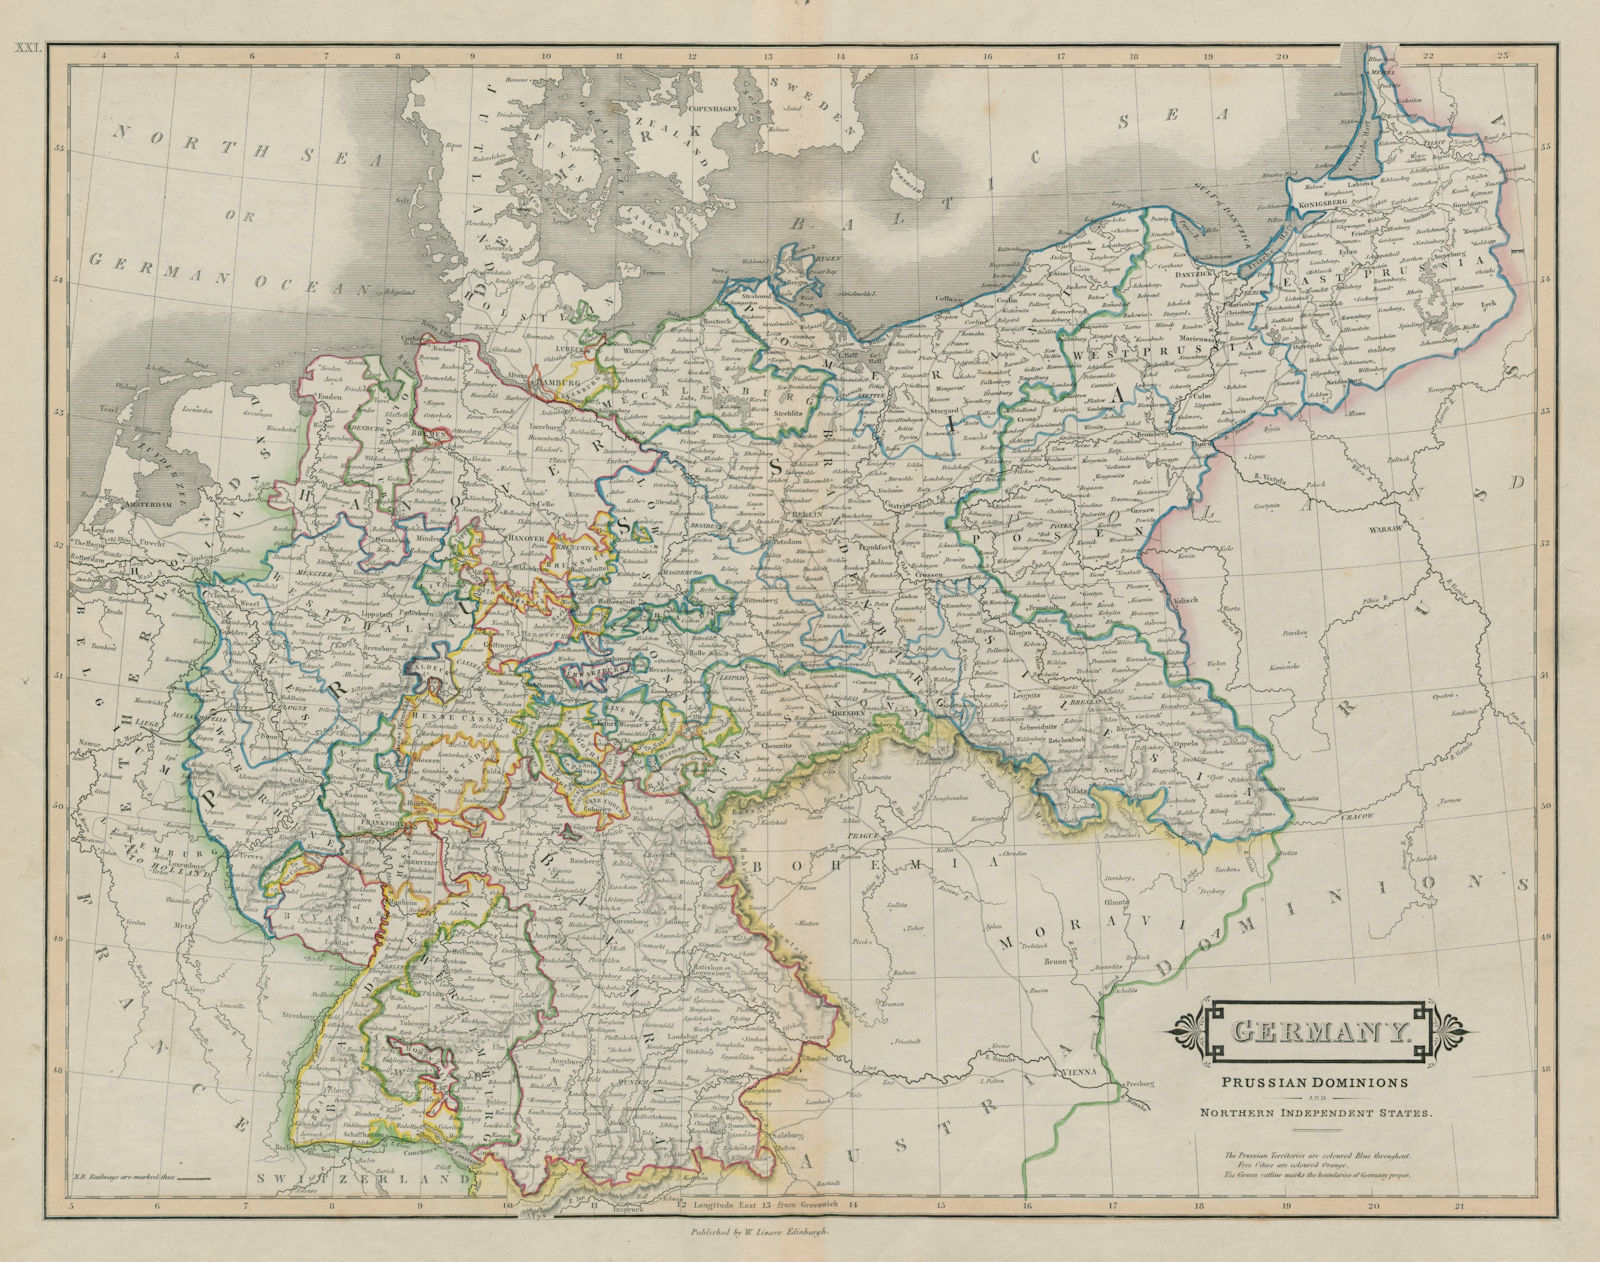 Germany, Prussian dominions, and northern independent states. LIZARS 1842 map